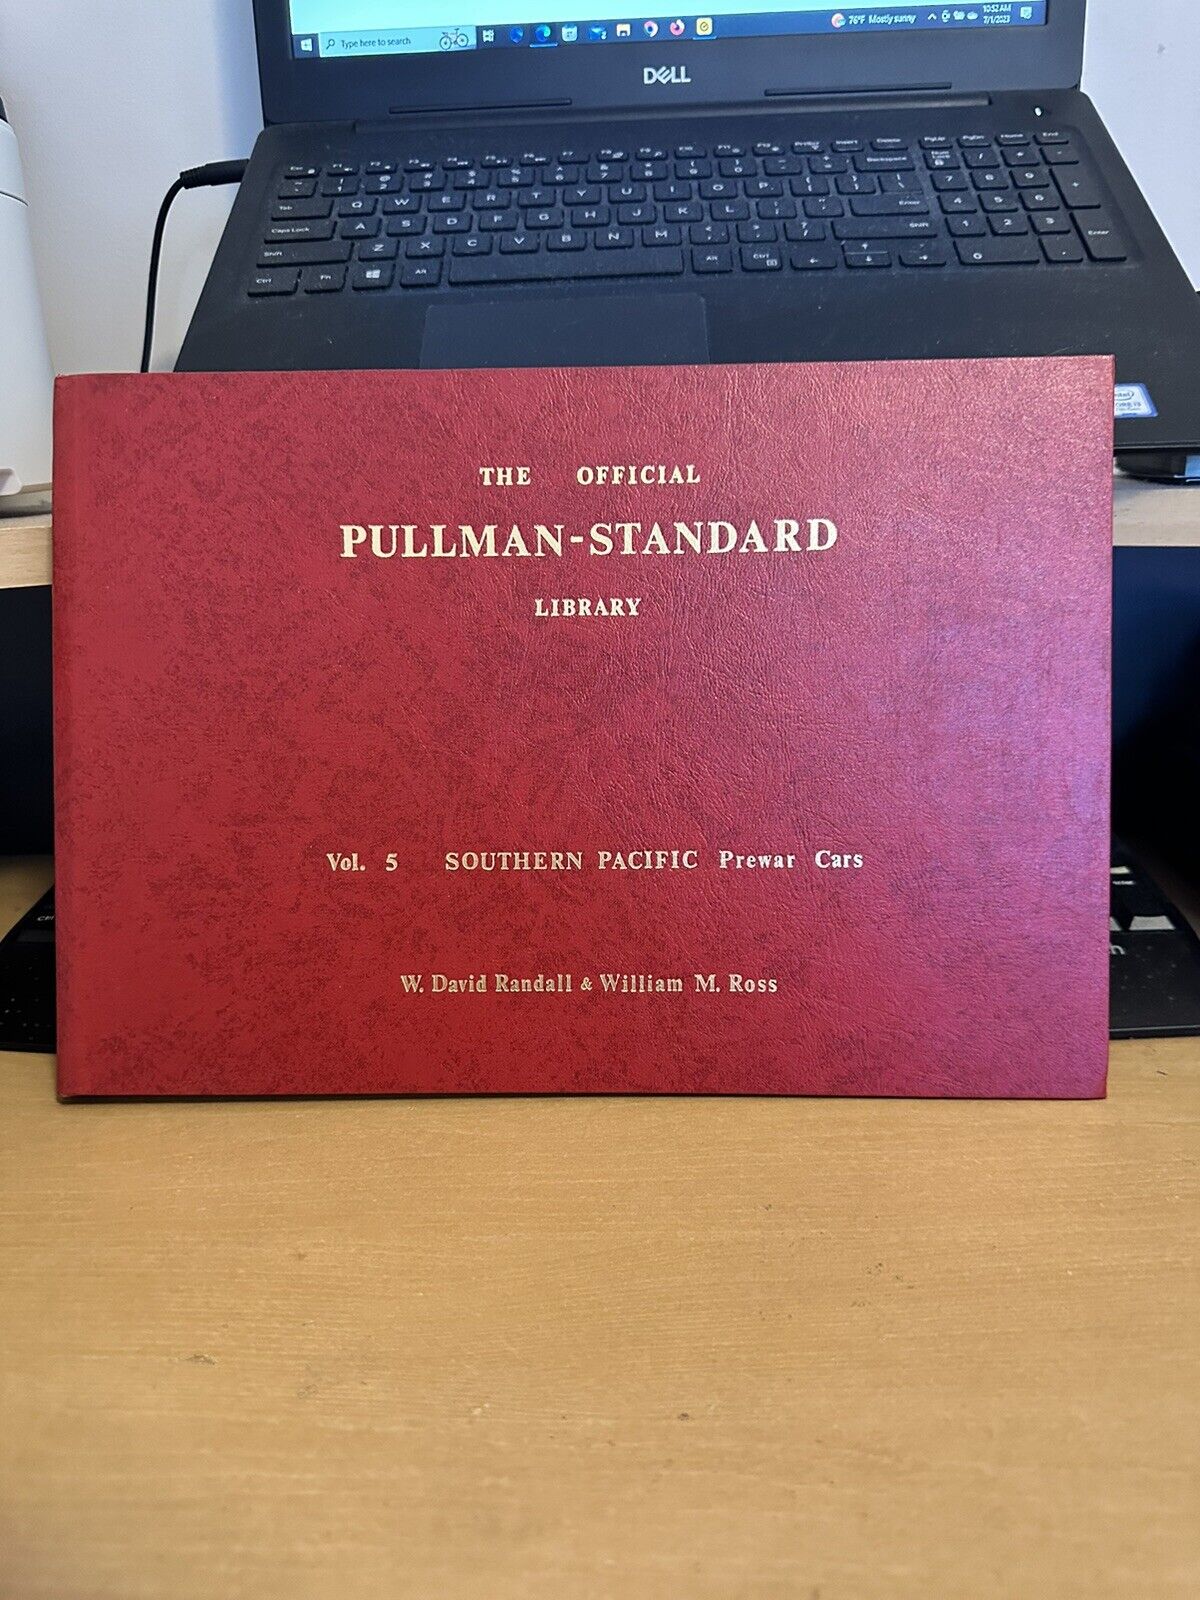 The Official Pullman-Standard Library-Volume 5:Southern Pacific Prewar Cars